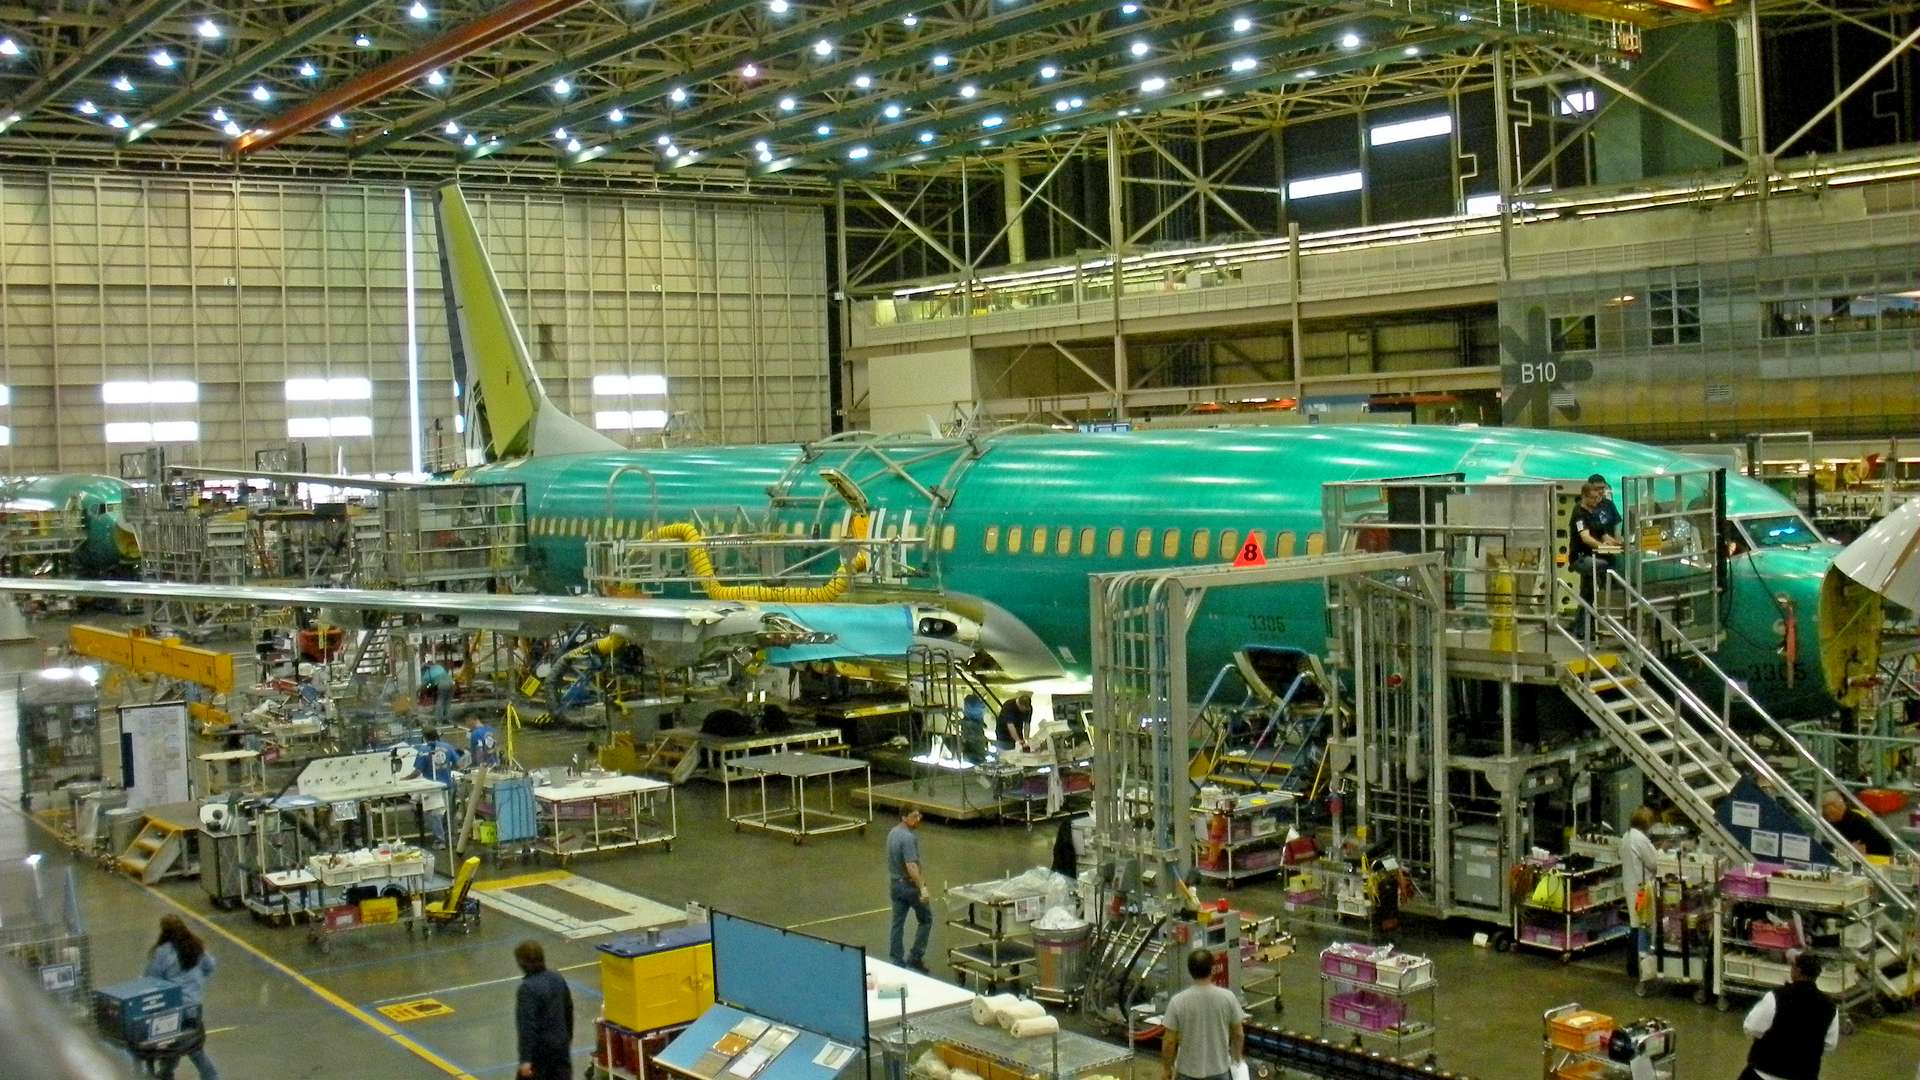 Boeing Rolling Back Controversial “Partnering For Success” Deal?